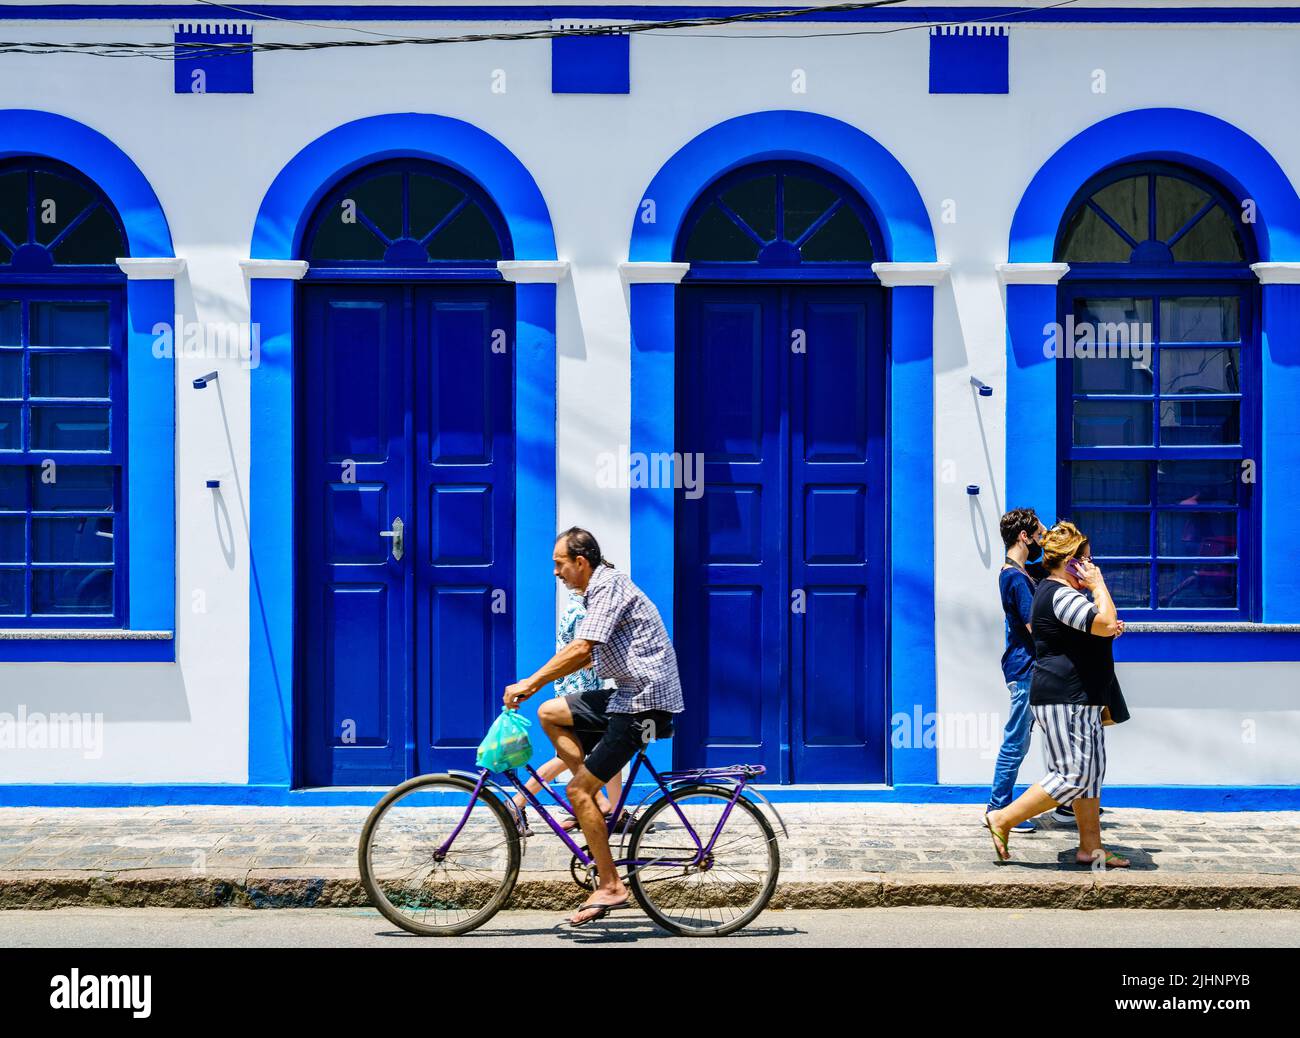 Morretes, Brazil, January 21, 2022: people are passing by a colorful house facade in historic town of Morretes, Brazil Stock Photo